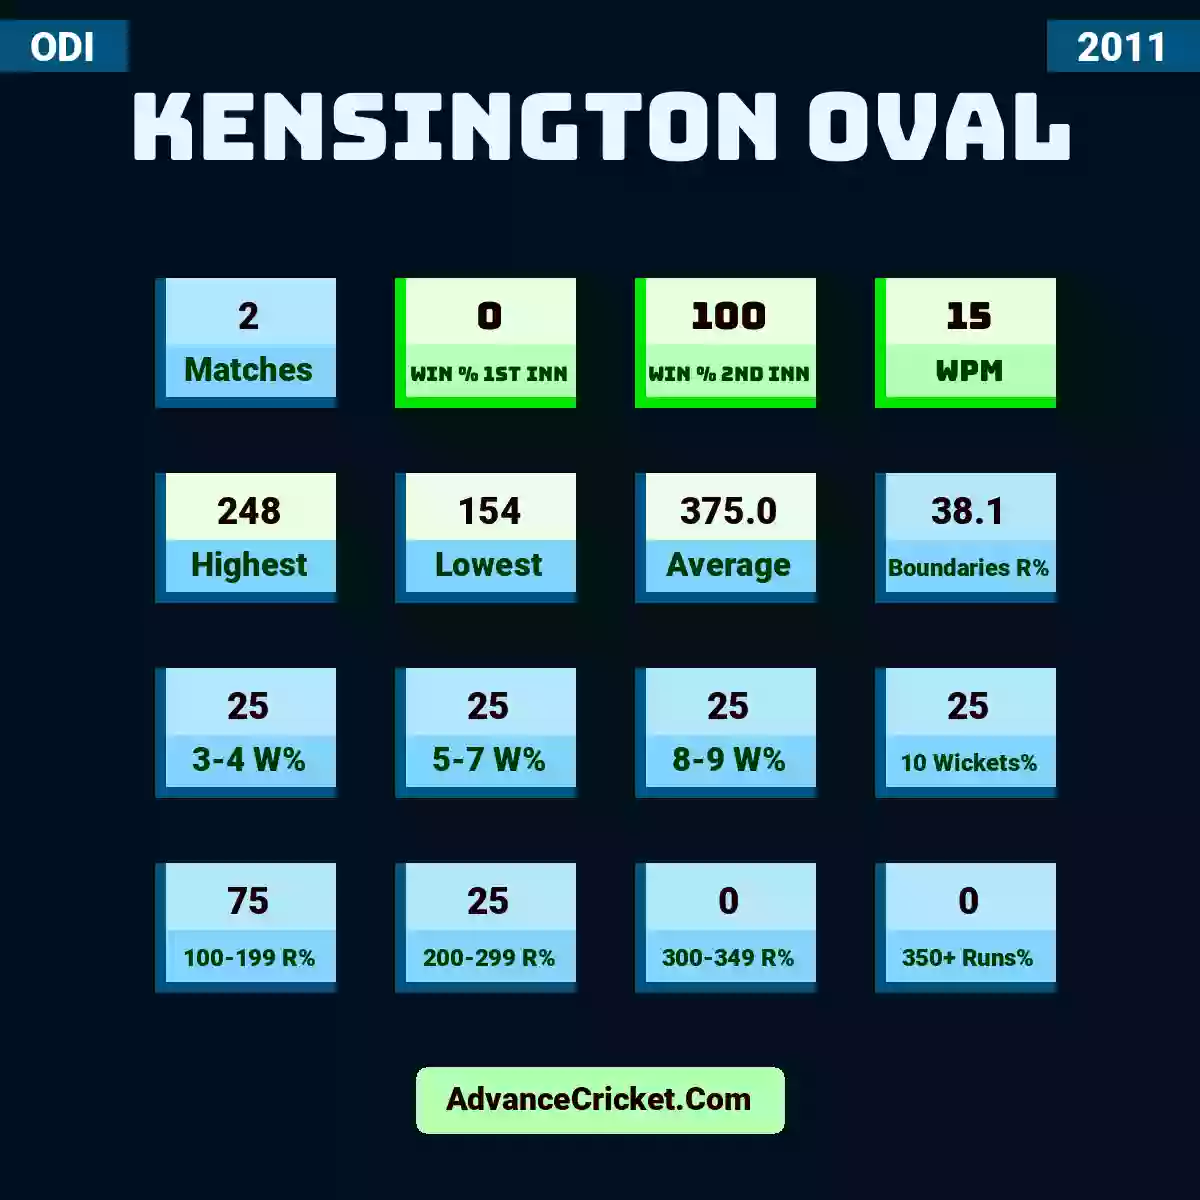 Image showing Kensington Oval with Matches: 2, Win % 1st Inn: 0, Win % 2nd Inn: 100, WPM: 15, Highest: 248, Lowest: 154, Average: 375.0, Boundaries R%: 38.1, 3-4 W%: 25, 5-7 W%: 25, 8-9 W%: 25, 10 Wickets%: 25, 100-199 R%: 75, 200-299 R%: 25, 300-349 R%: 0, 350+ Runs%: 0.